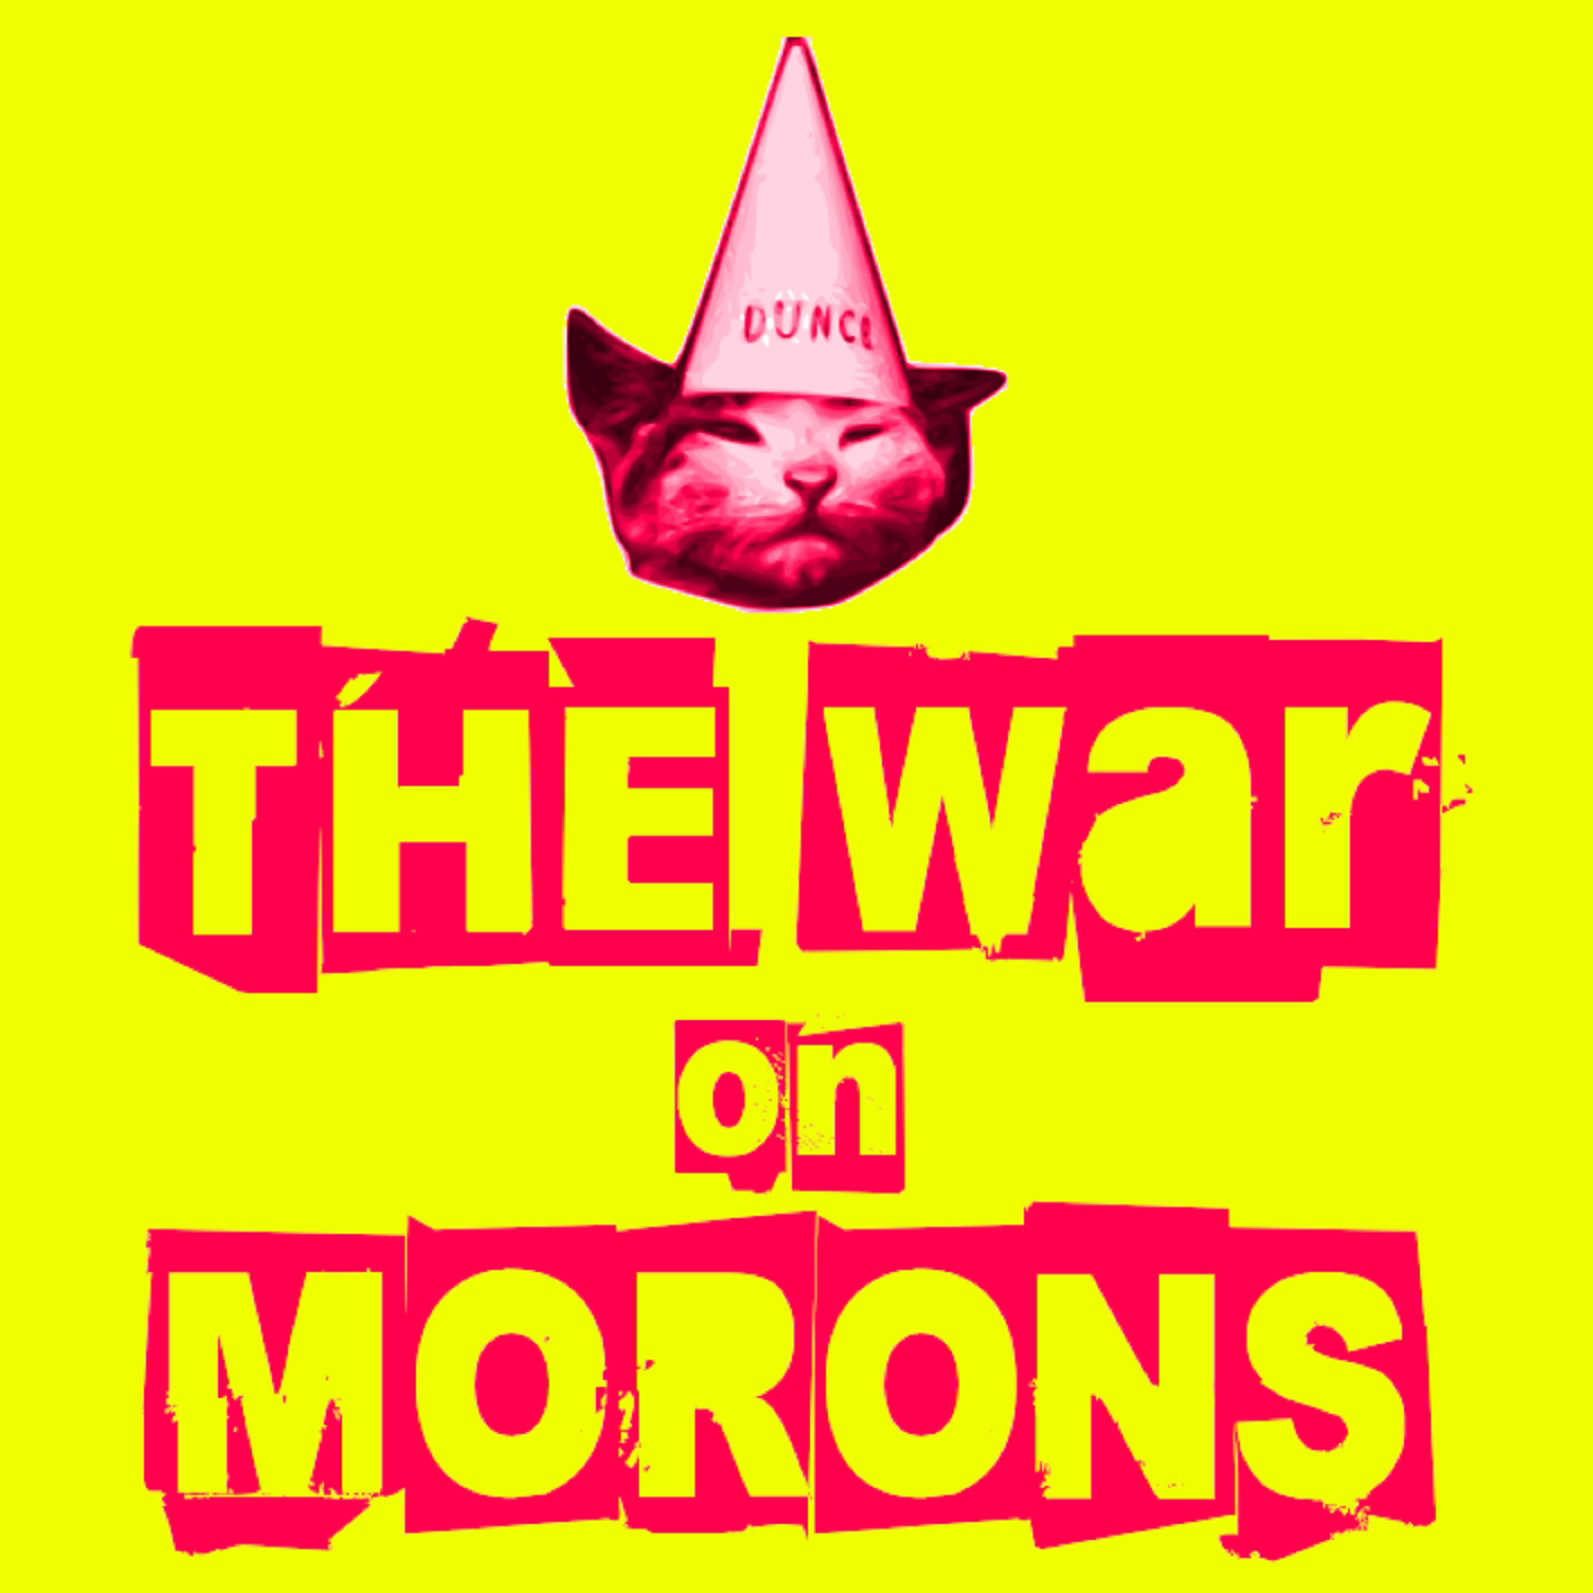 A highlight from The War On Morons Episode 100 - Revenge of the Morons!